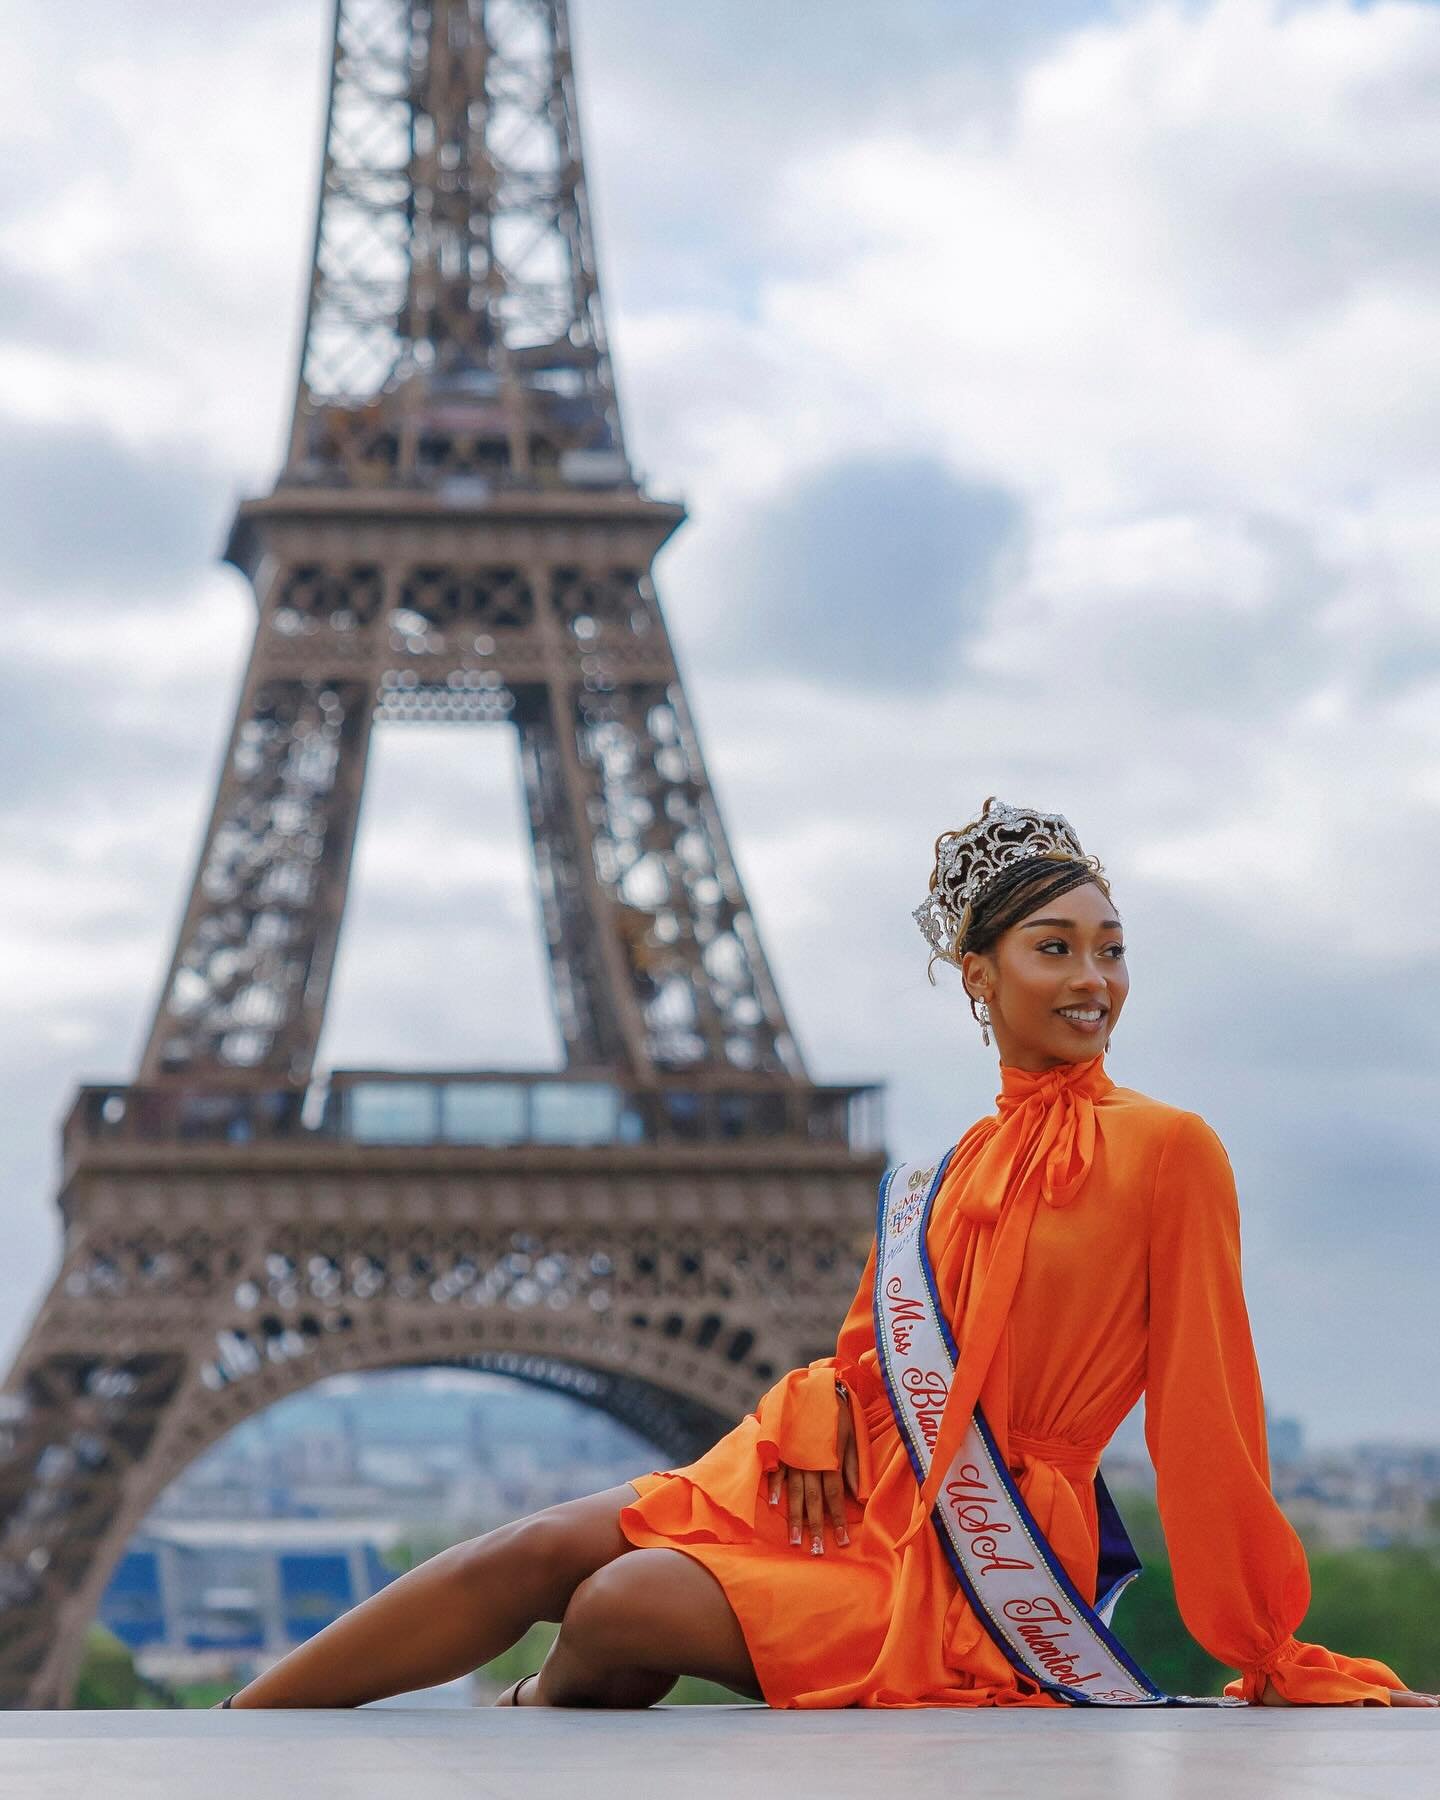 BLACK GIRL IN PARIS! 🇫🇷  Did you know Miss Black USA has a Talented Teen division for girls ages 14 to 19? 🌟

Yes, it&rsquo;s true, and they are absolute powerhouses of talent and intelligence! 💫 

Meet our reigning teen queen, 18-year-old Iyana 